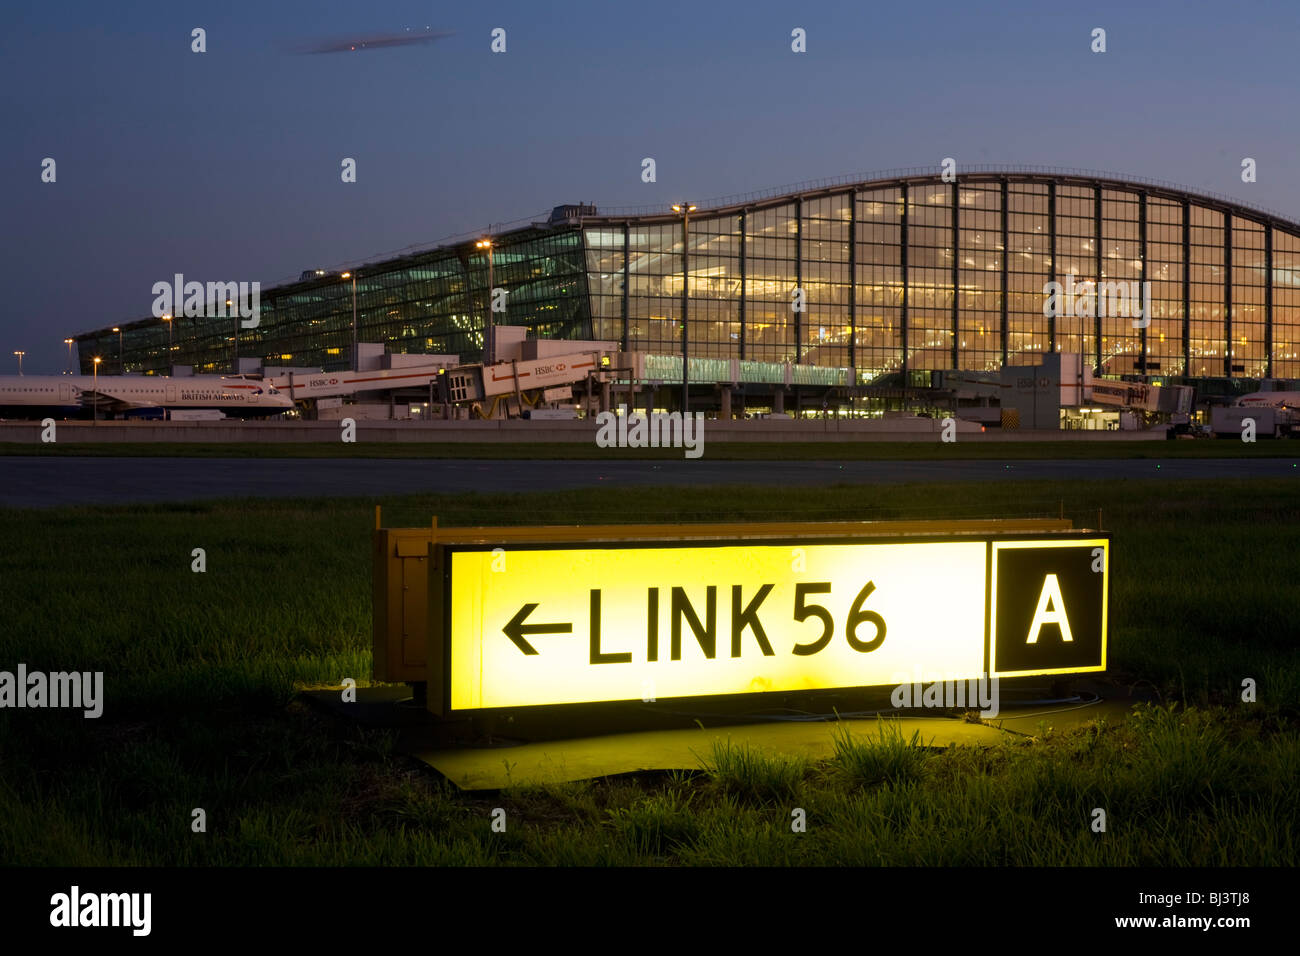 Exterior view of Heathrow Airport's Terminal 5 building with airfield navigation taxiway sign. Stock Photo